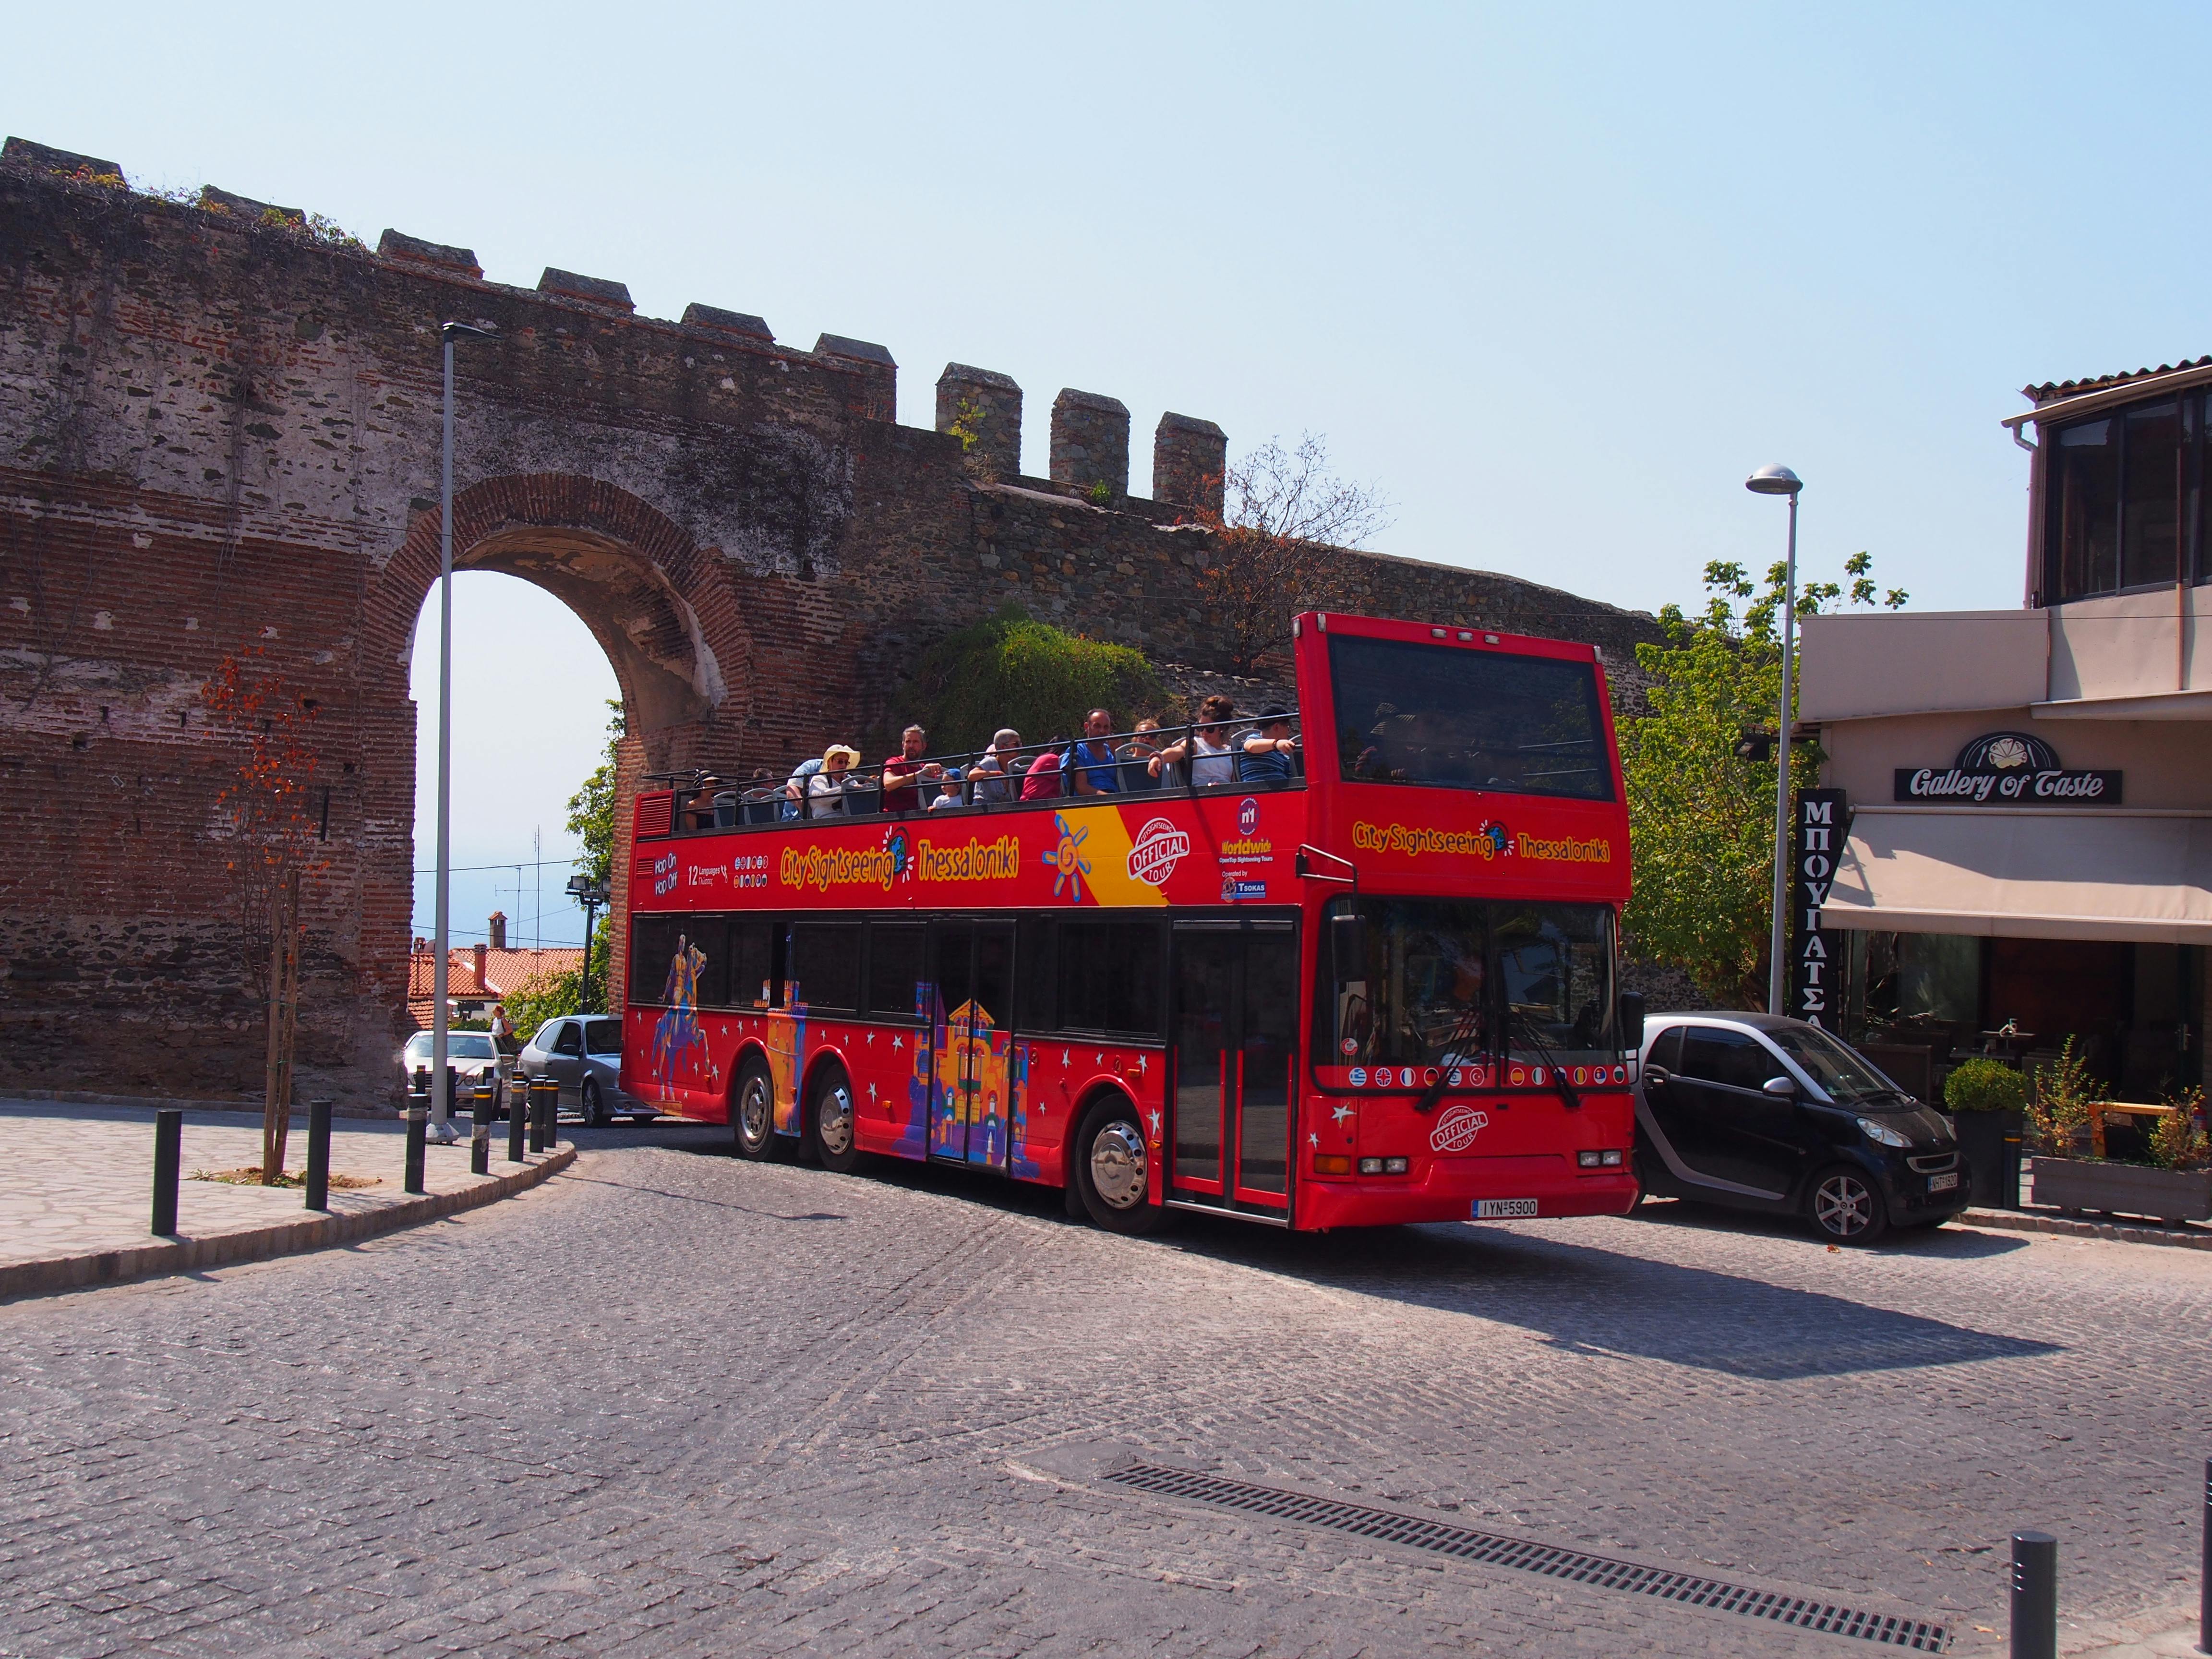 City Sightseeing hop-on hop-off bus tour of Thessaloniki